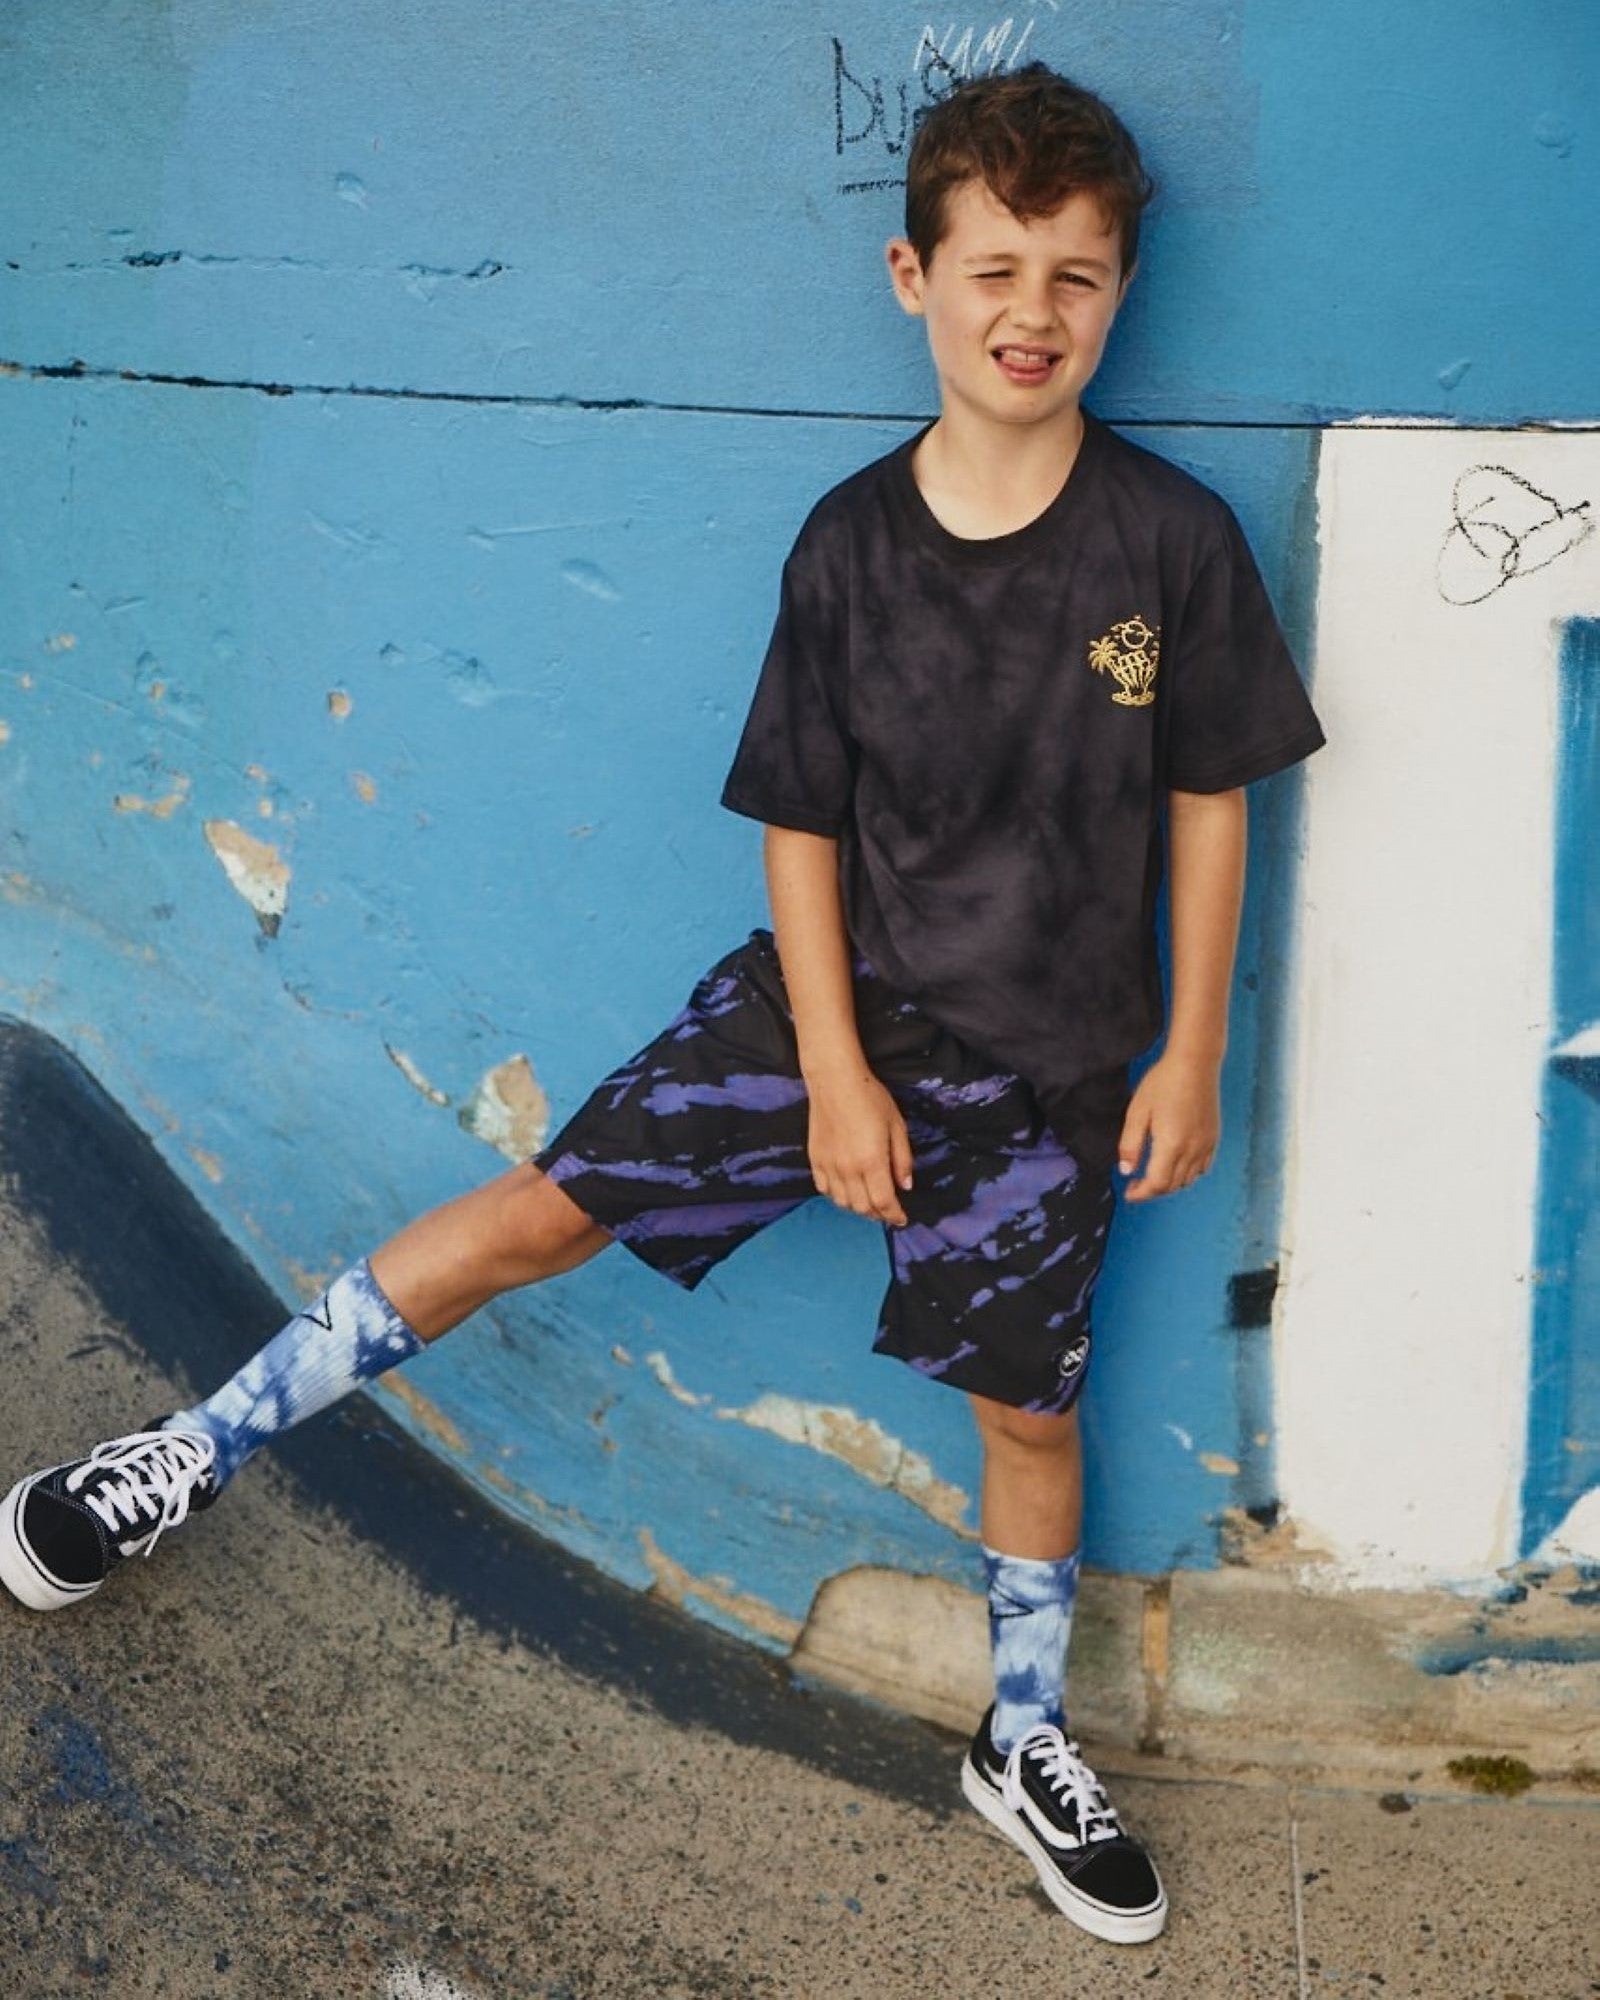 Alphabet Soup's Kids Night Howler Shaka Tee for boys aged 2-7. Featuring 100% black cotton jersey, reg. fit, short sleeves, ribbed neck, two-tone tie dye, shaka print with “Good Times Ahead” on chest & back.